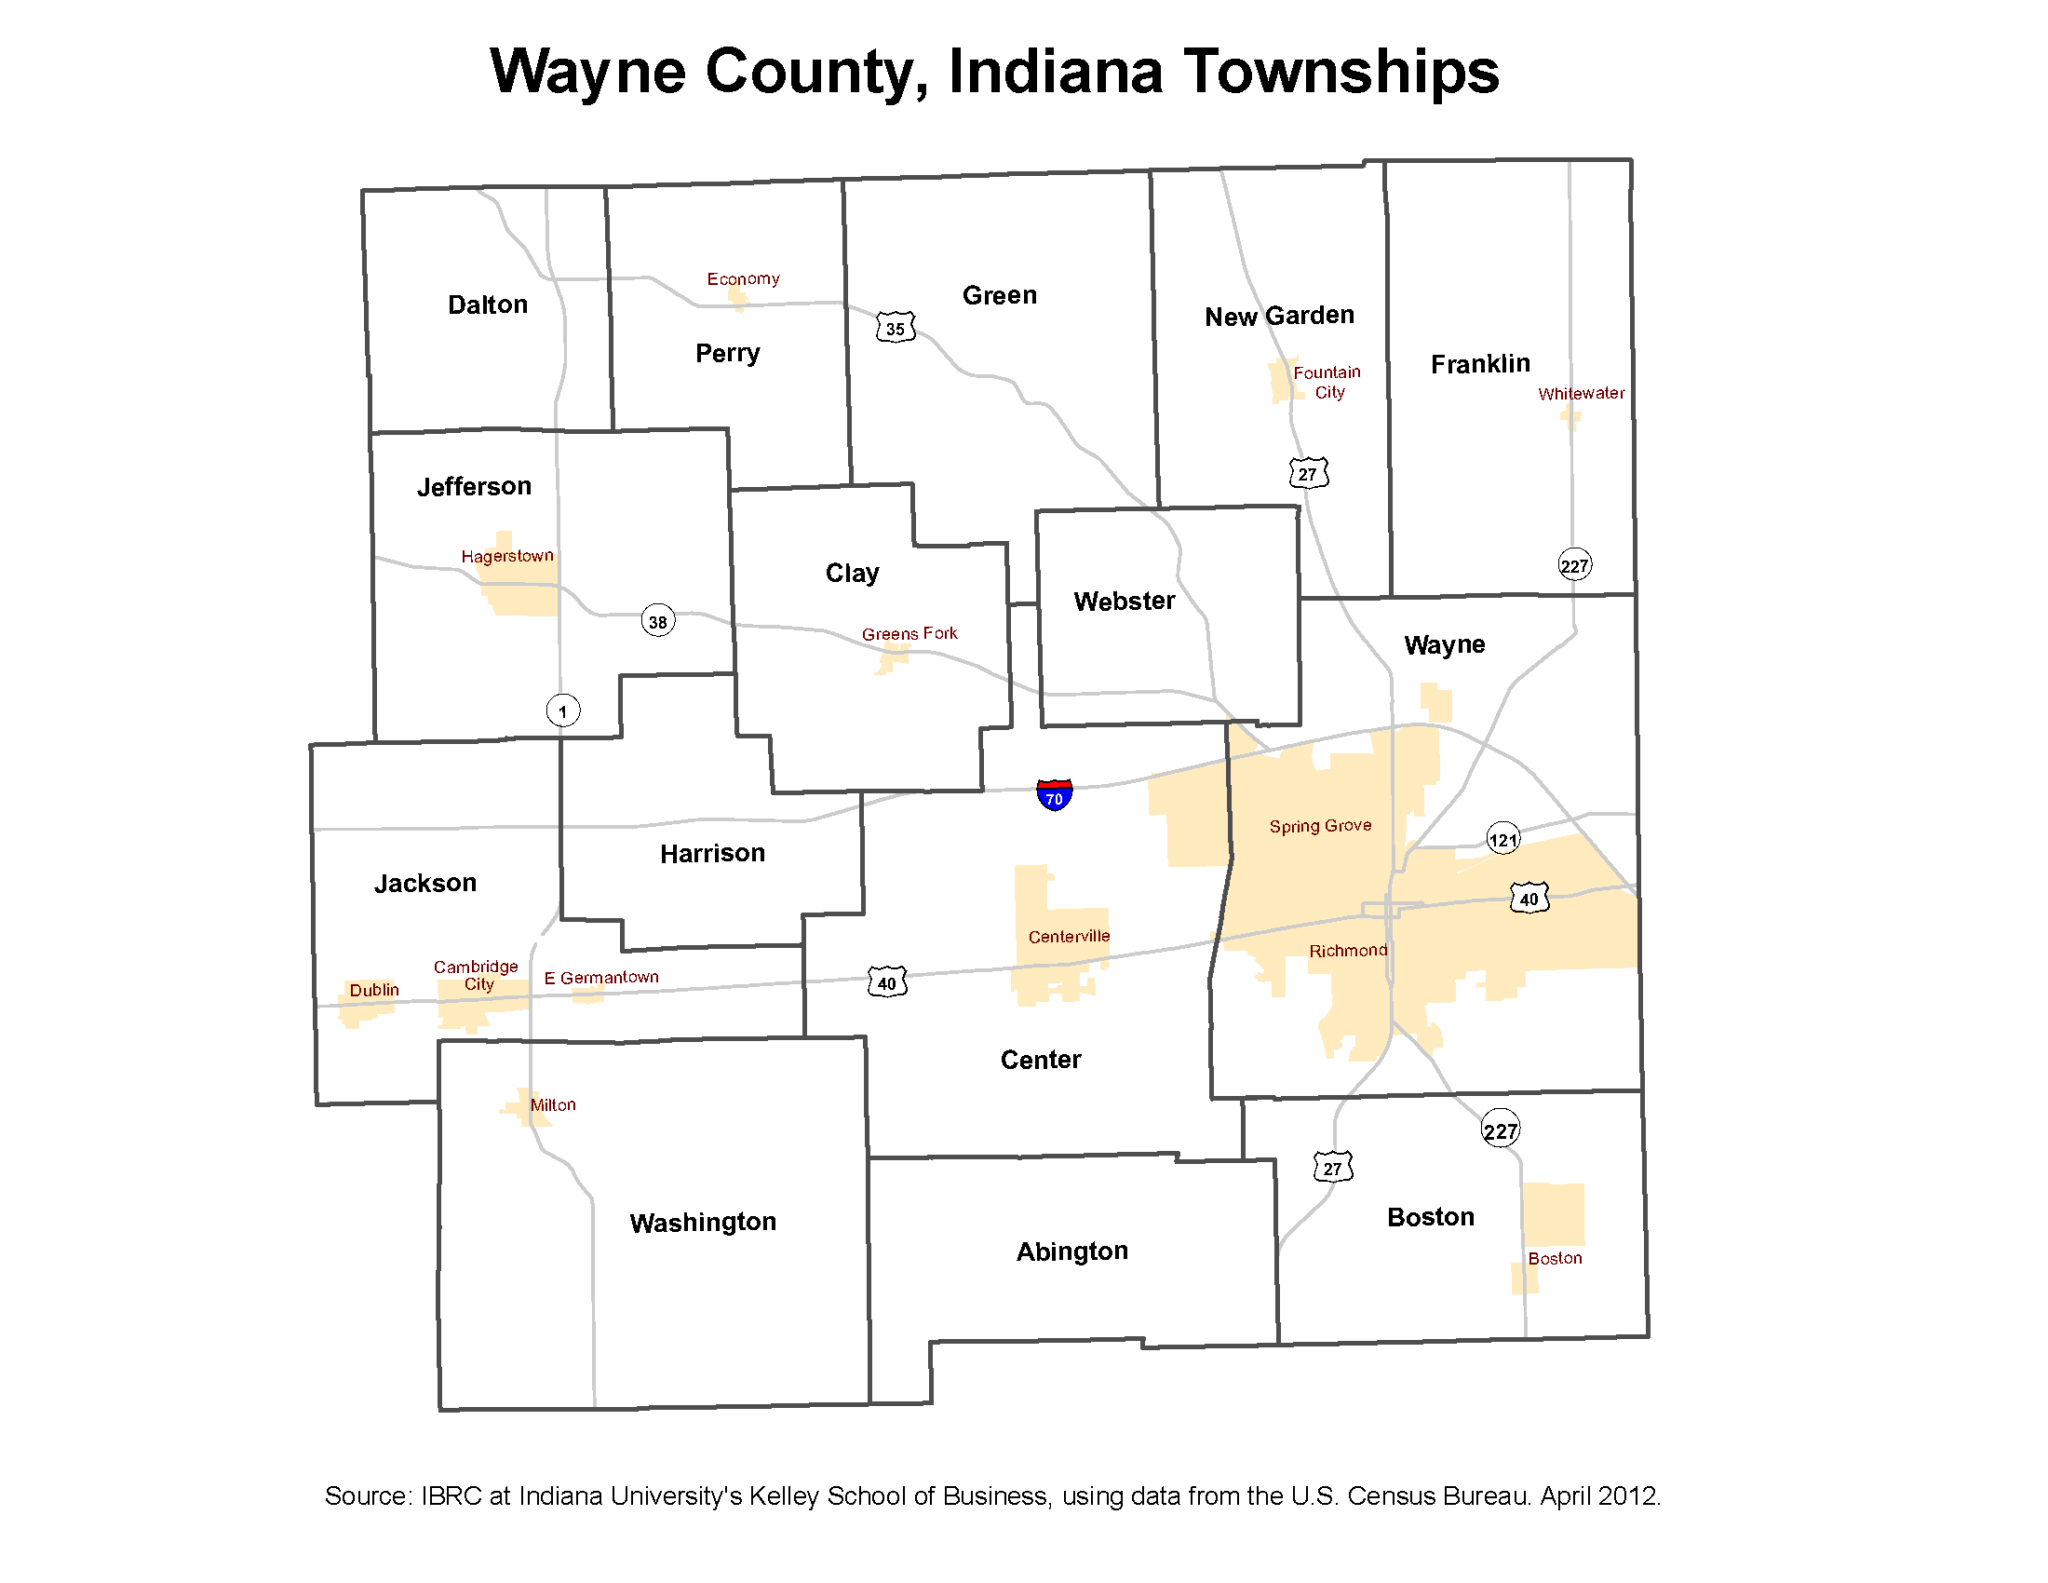 wayne-county-townships-morrisson-reeves-library-richmond-indiana